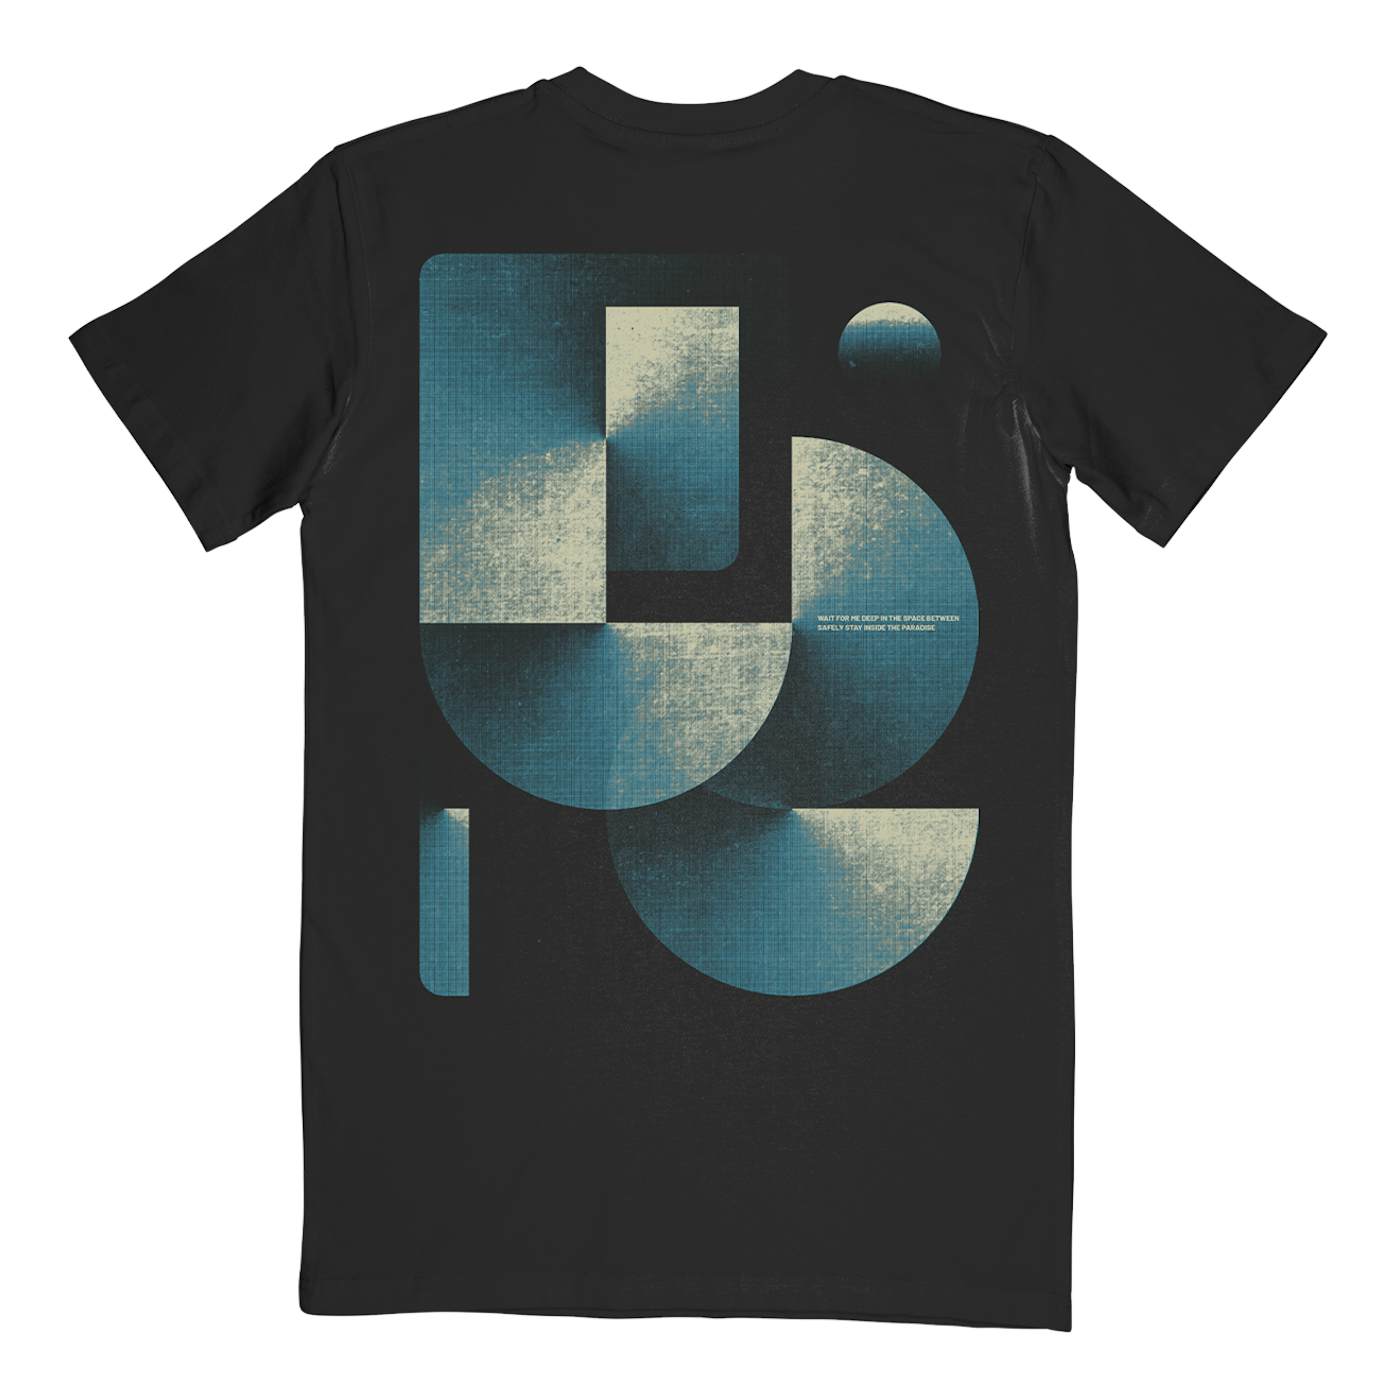 Invent Animate "Space Between" T-Shirt